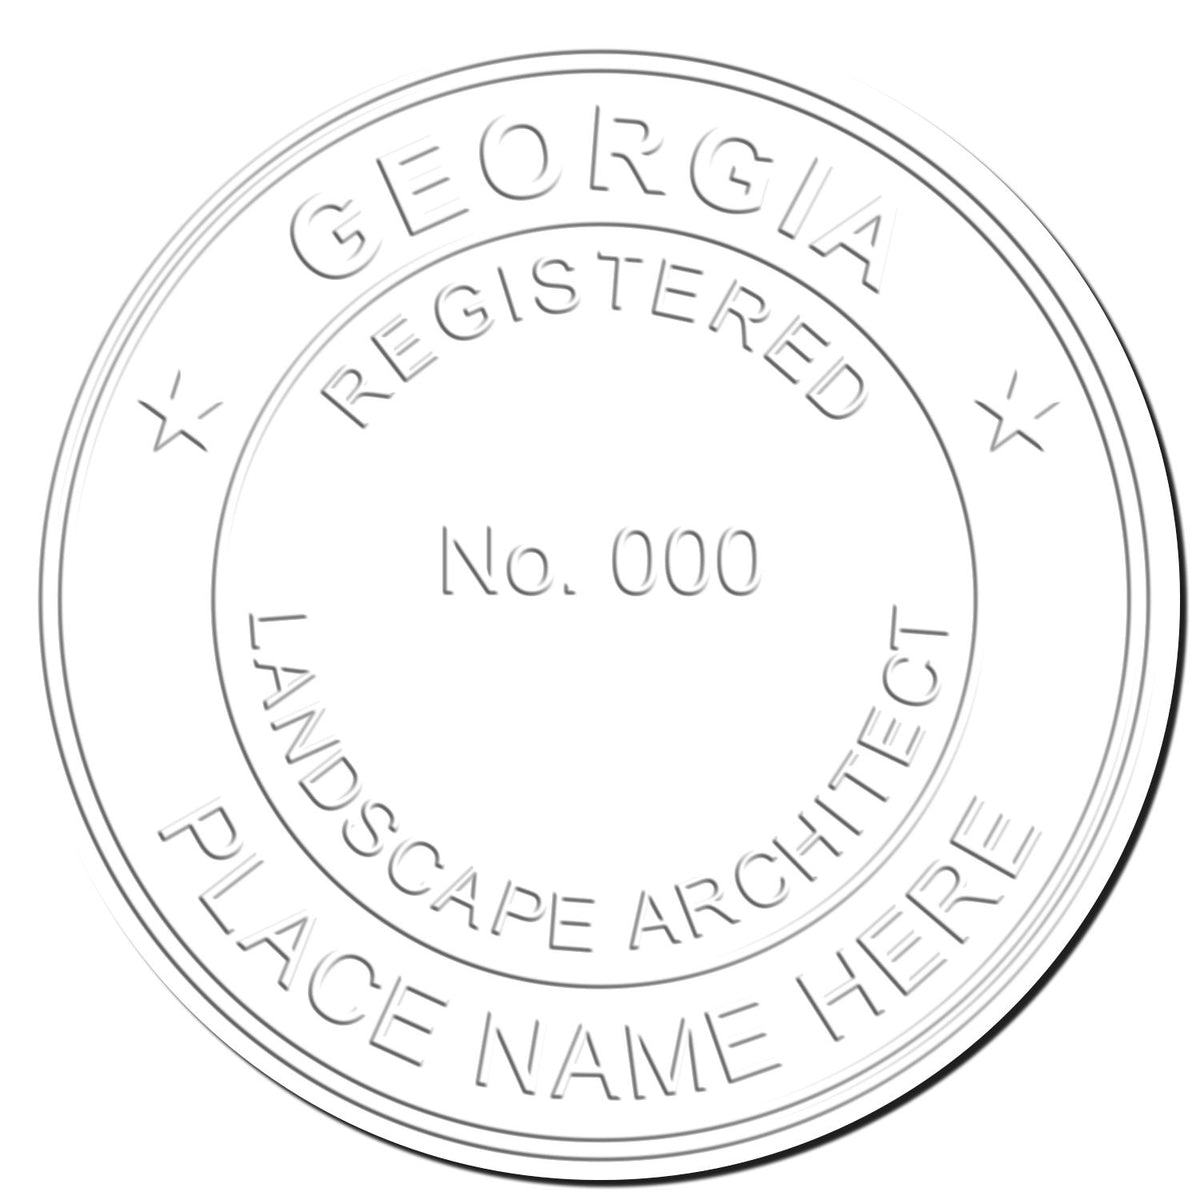 This paper is stamped with a sample imprint of the Soft Pocket Georgia Landscape Architect Embosser, signifying its quality and reliability.